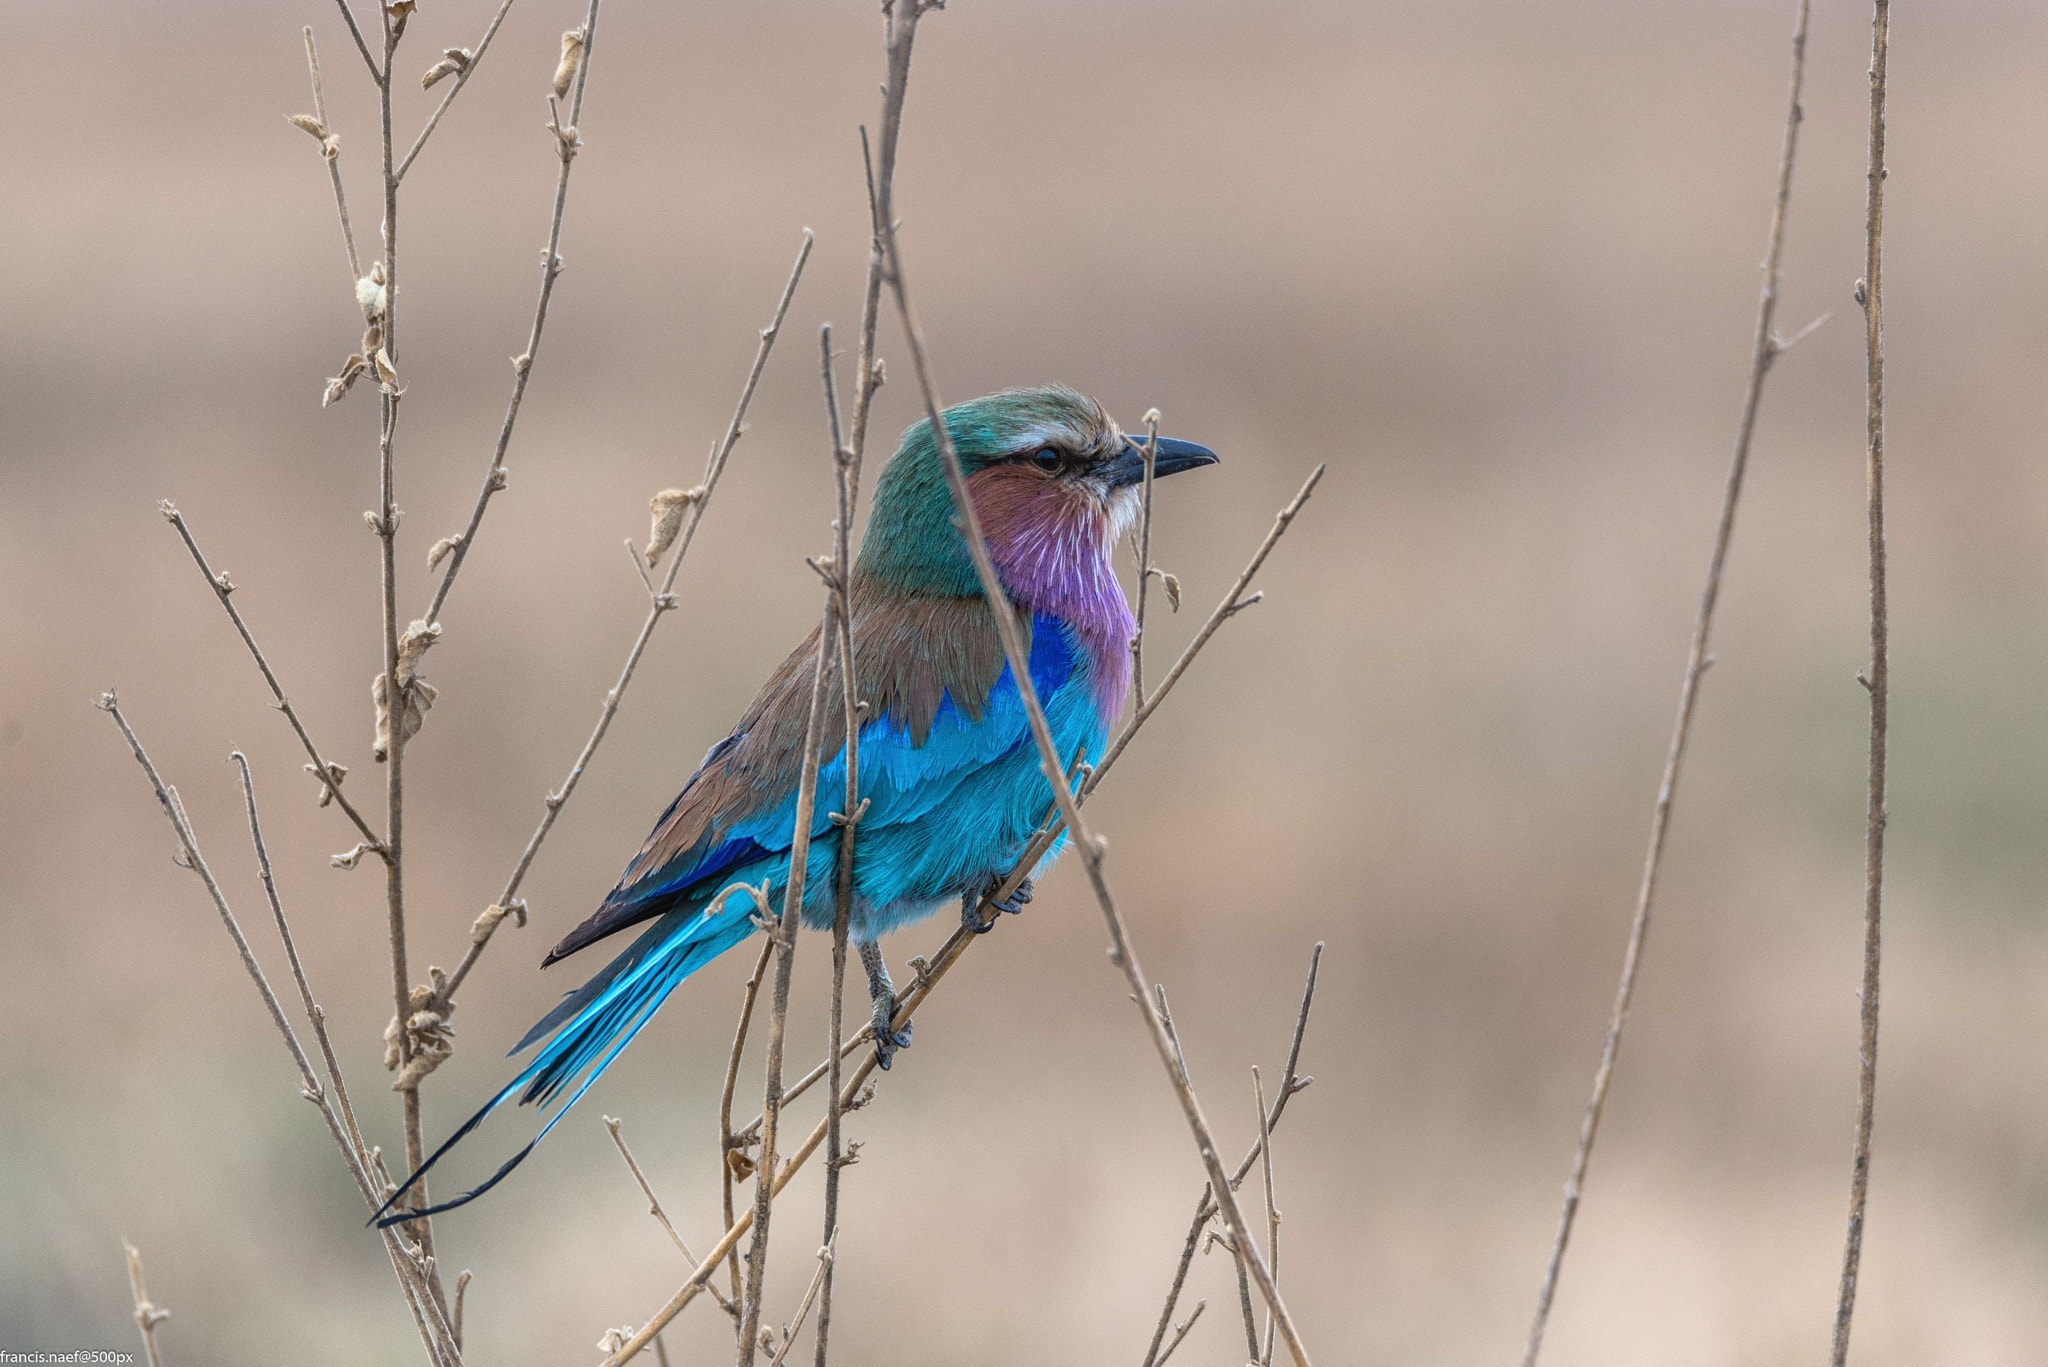 Nikon D800 + Sigma 150-600mm F5-6.3 DG OS HSM | S sample photo. Lilac-breasted roller photography